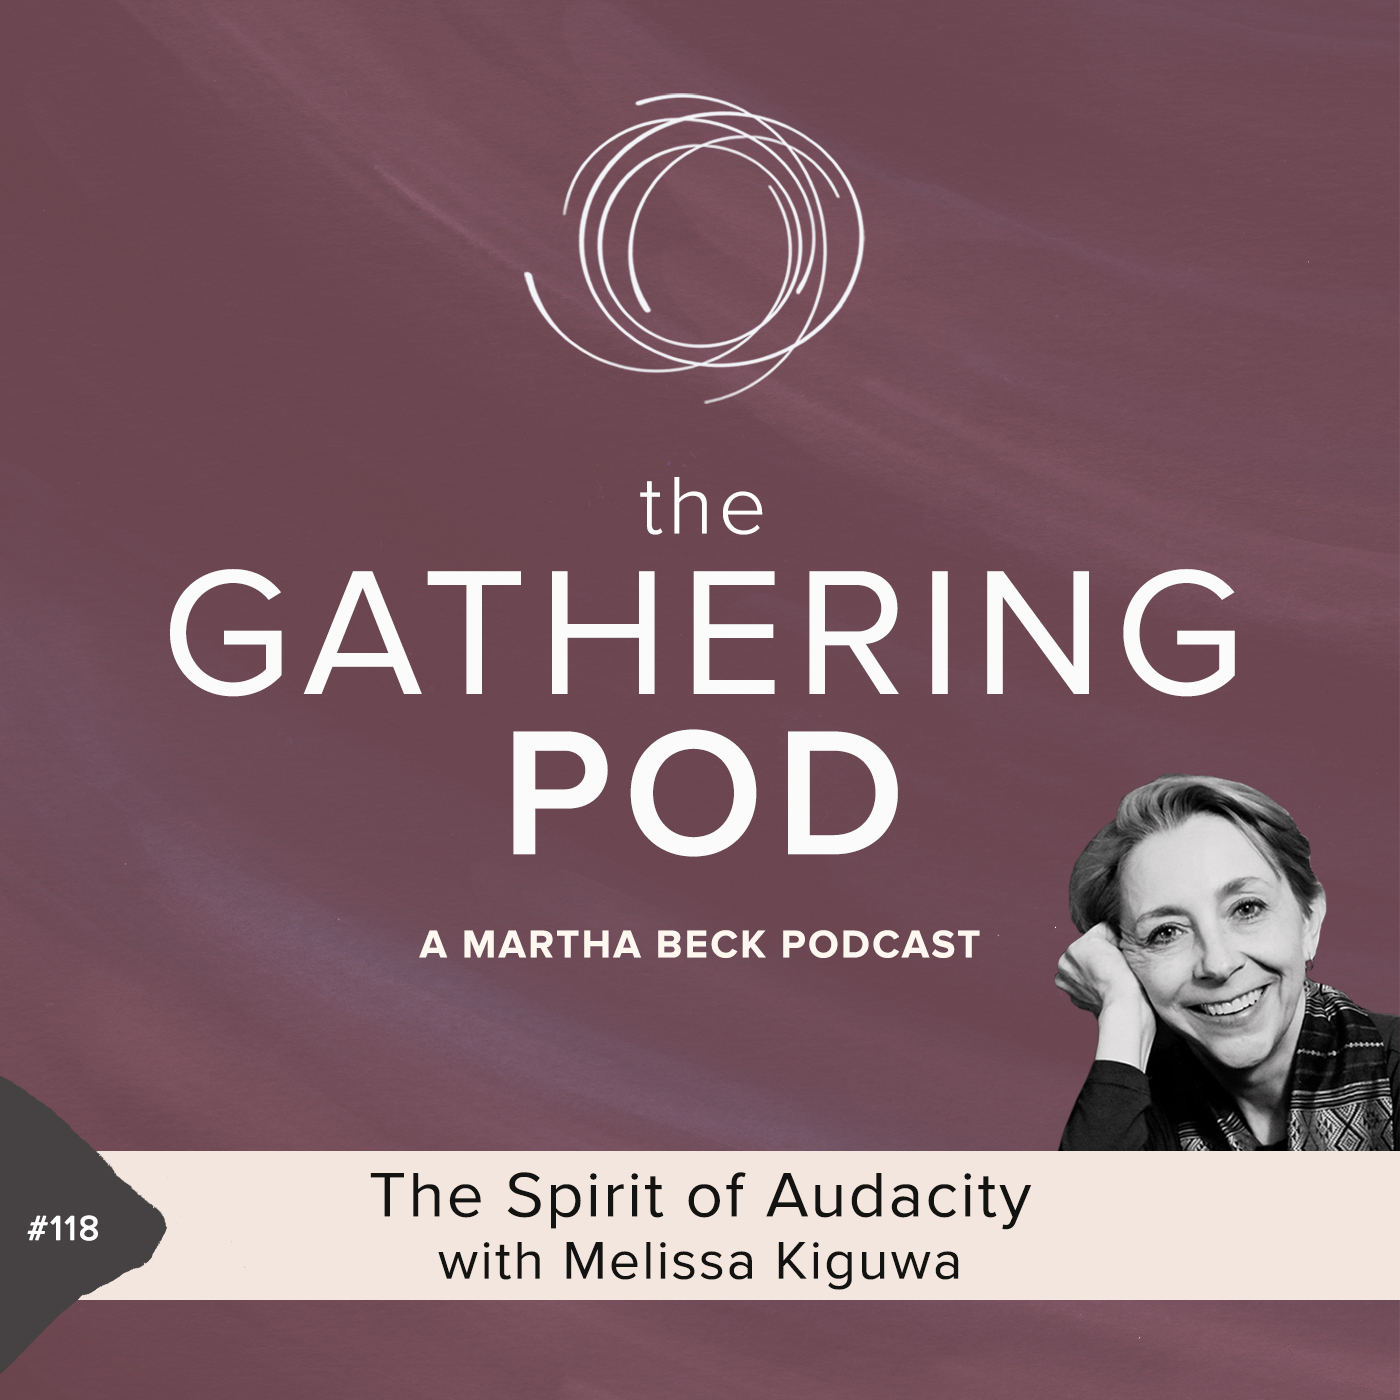 Image for The Gathering Pod A Martha Beck Podcast Episode #118 The Spirit of Audacity with Melissa Kiguwa